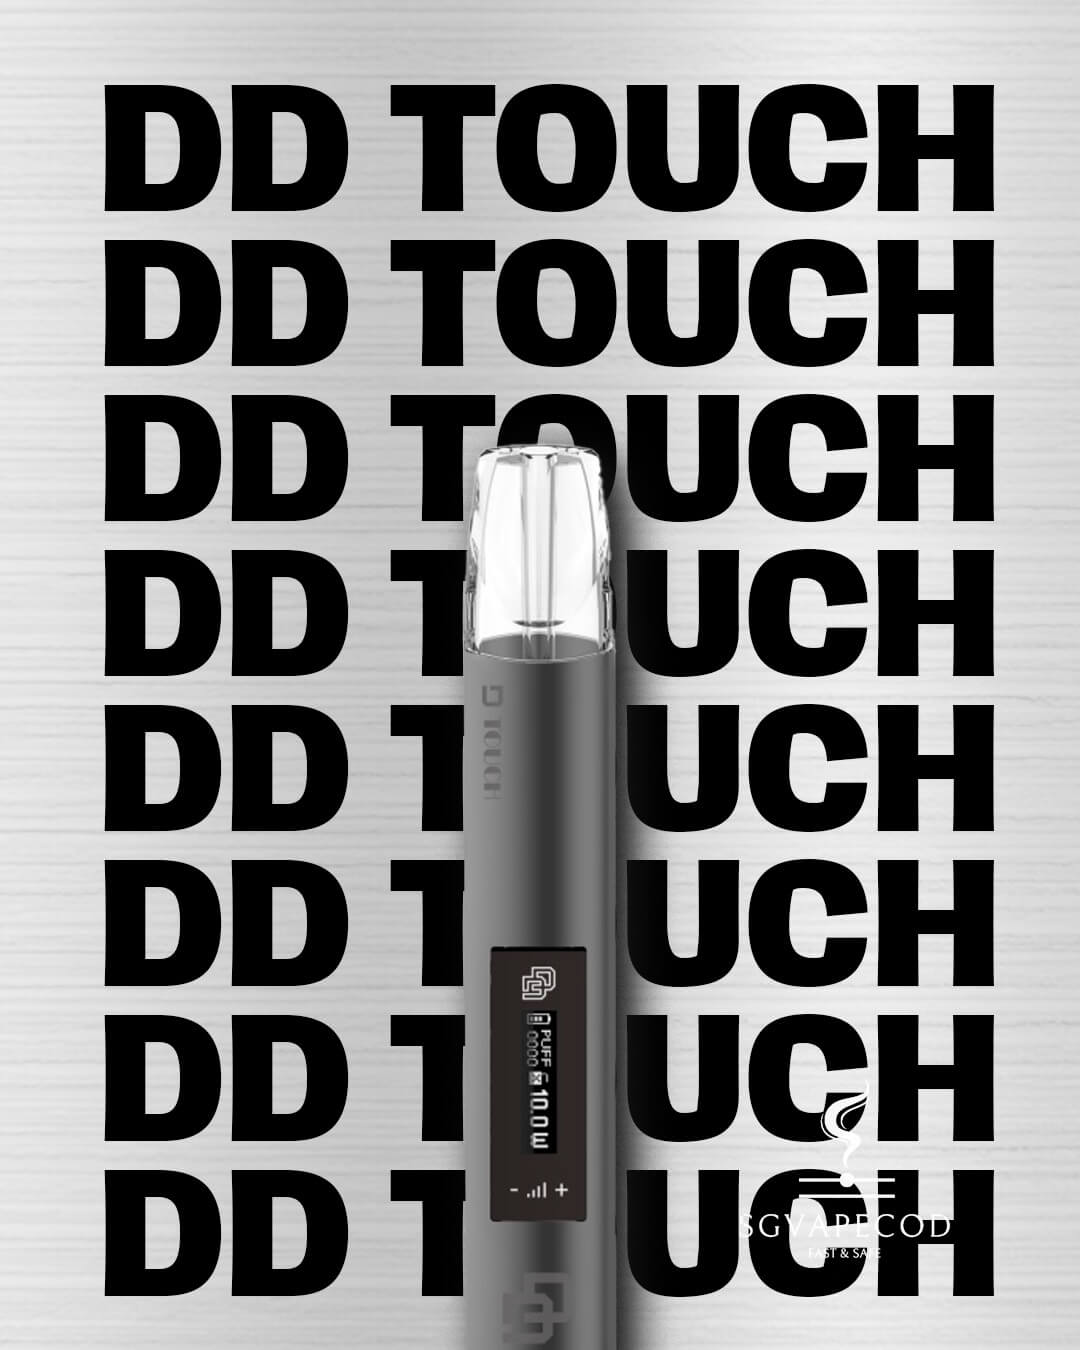 DD Touch Device